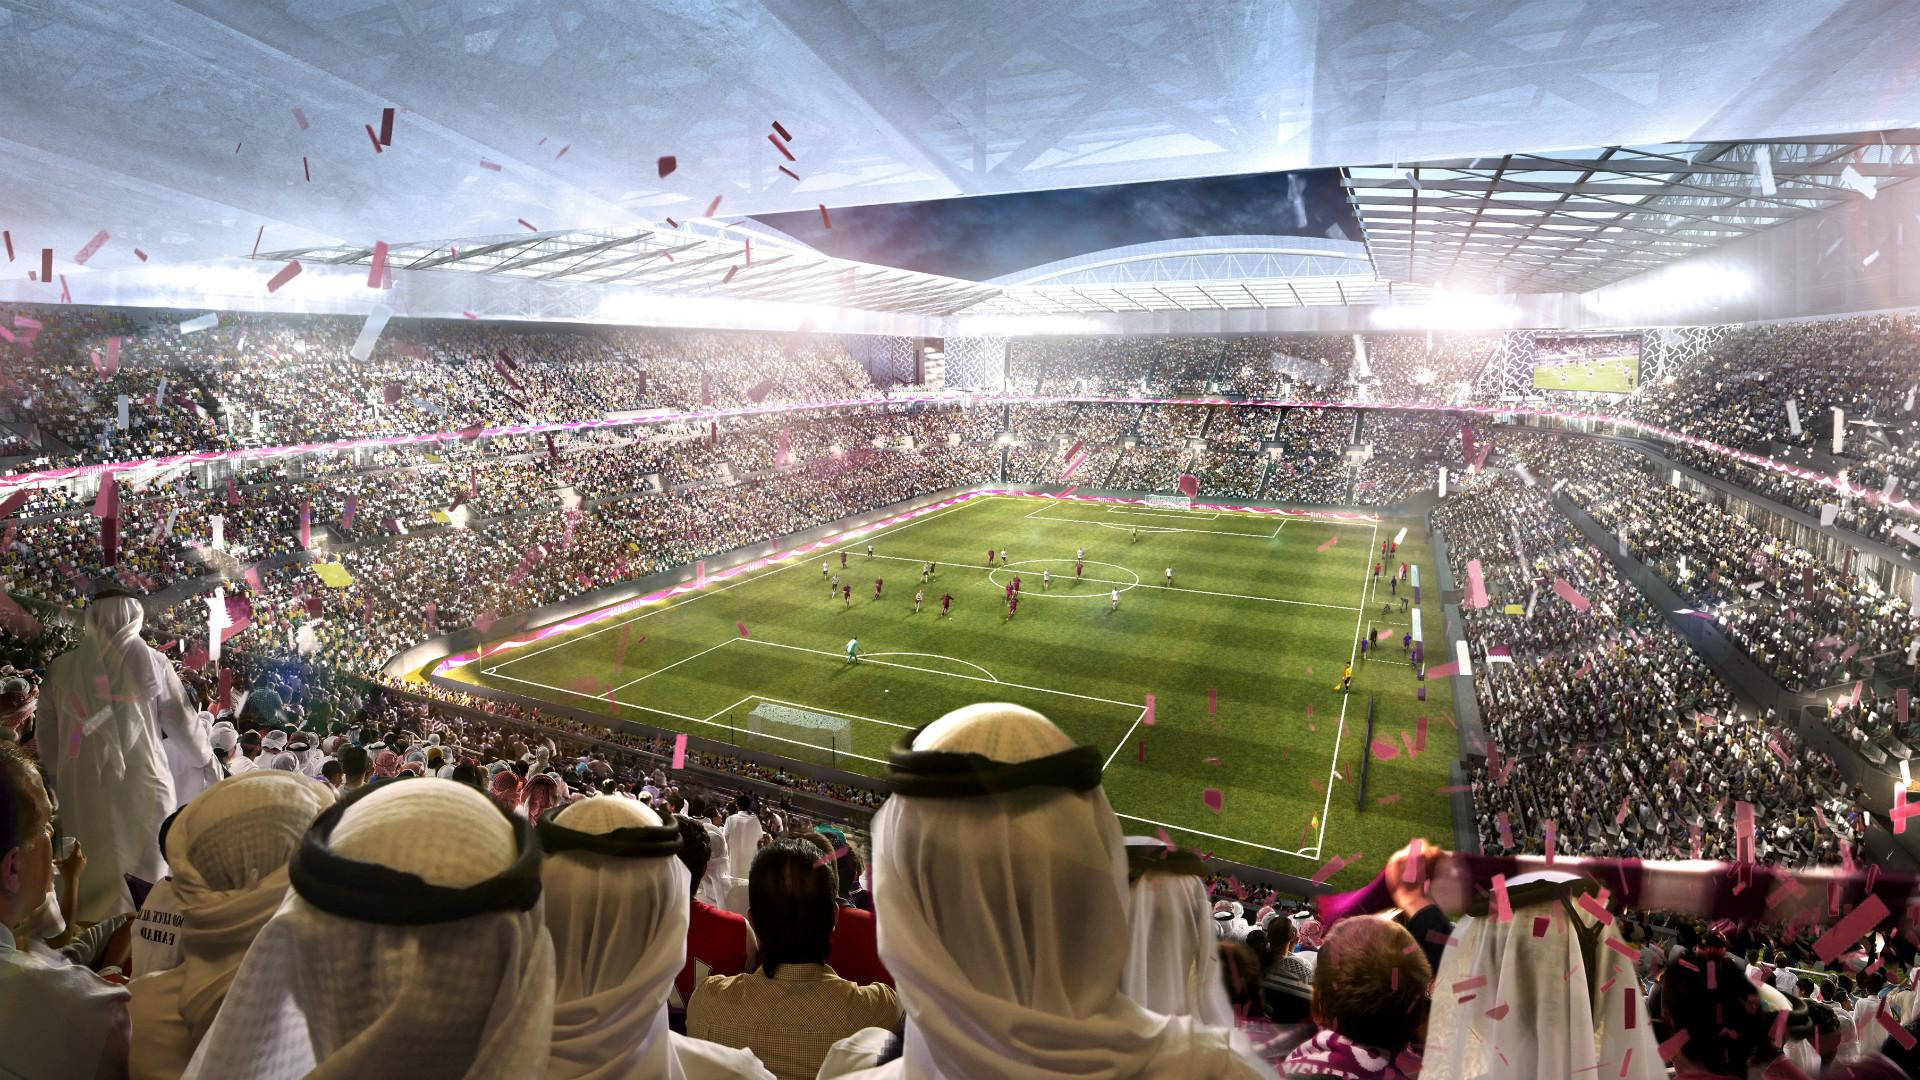 Ready for the Game! The Al Rayvan Stadium for FIFA World Cup 2022 Wallpaper